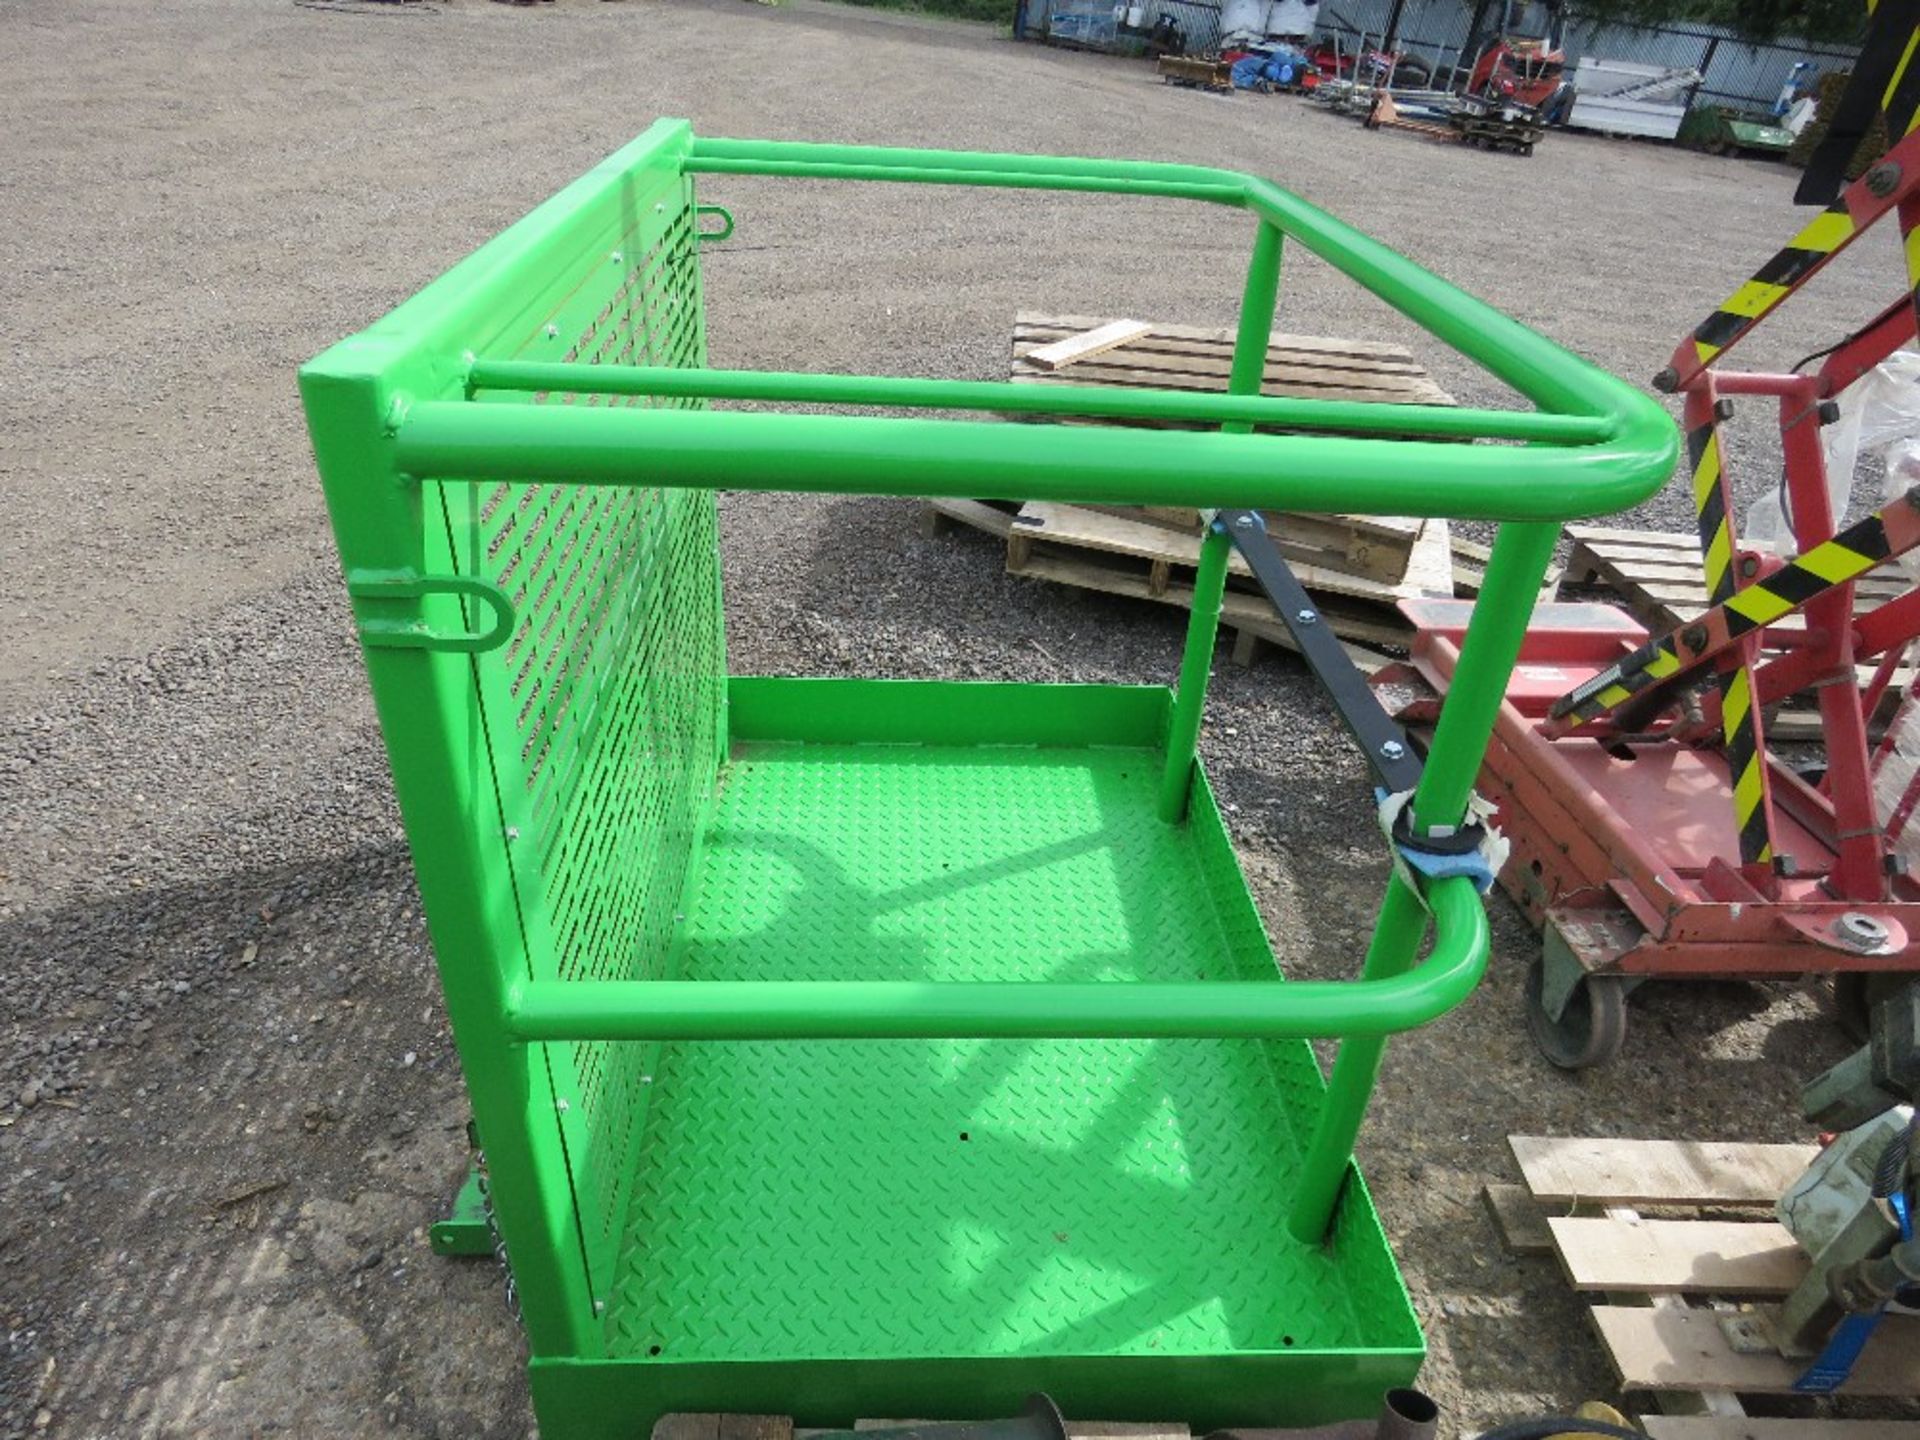 LWC AG PRODUCTS 2 PERSON MAN/PERSONEL FORKLIFT ACCESS CAGE, YEAR 2021, UNUSED. 300KG RATED CAPACITY. - Image 3 of 5